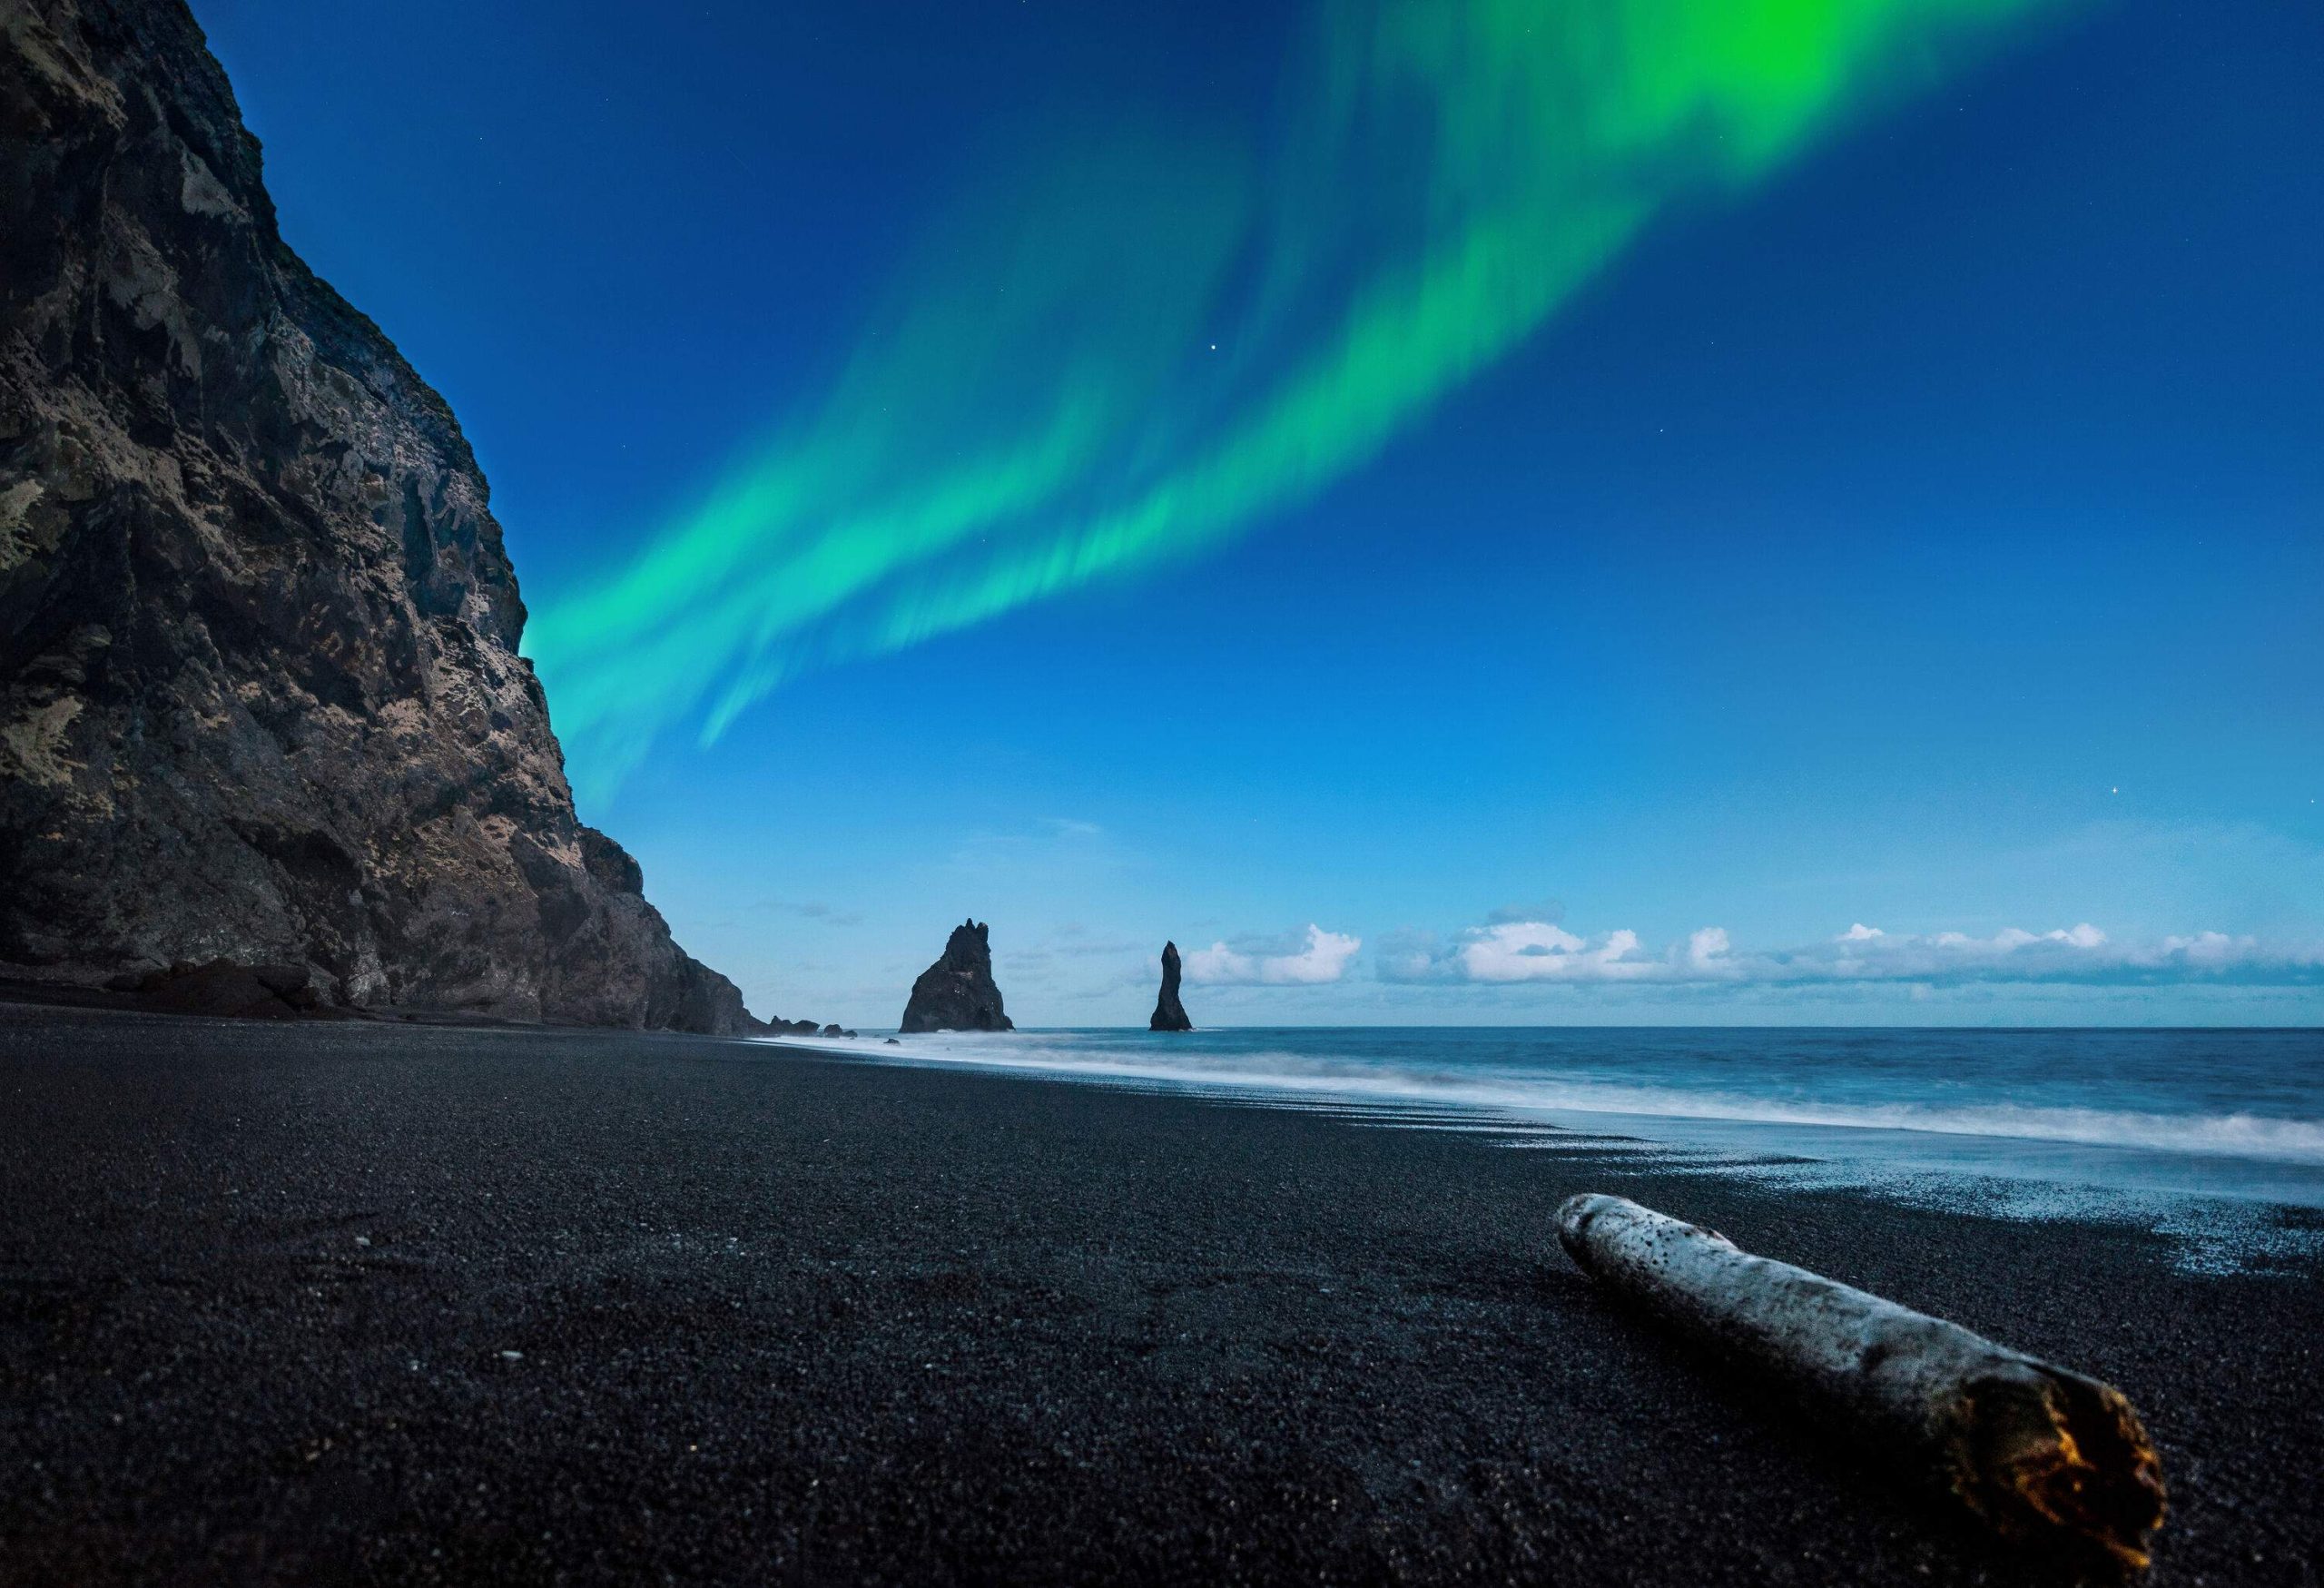 A spectacular display of the northern lights fills the night sky above a peaceful beach with a sheer rock formation to the side.